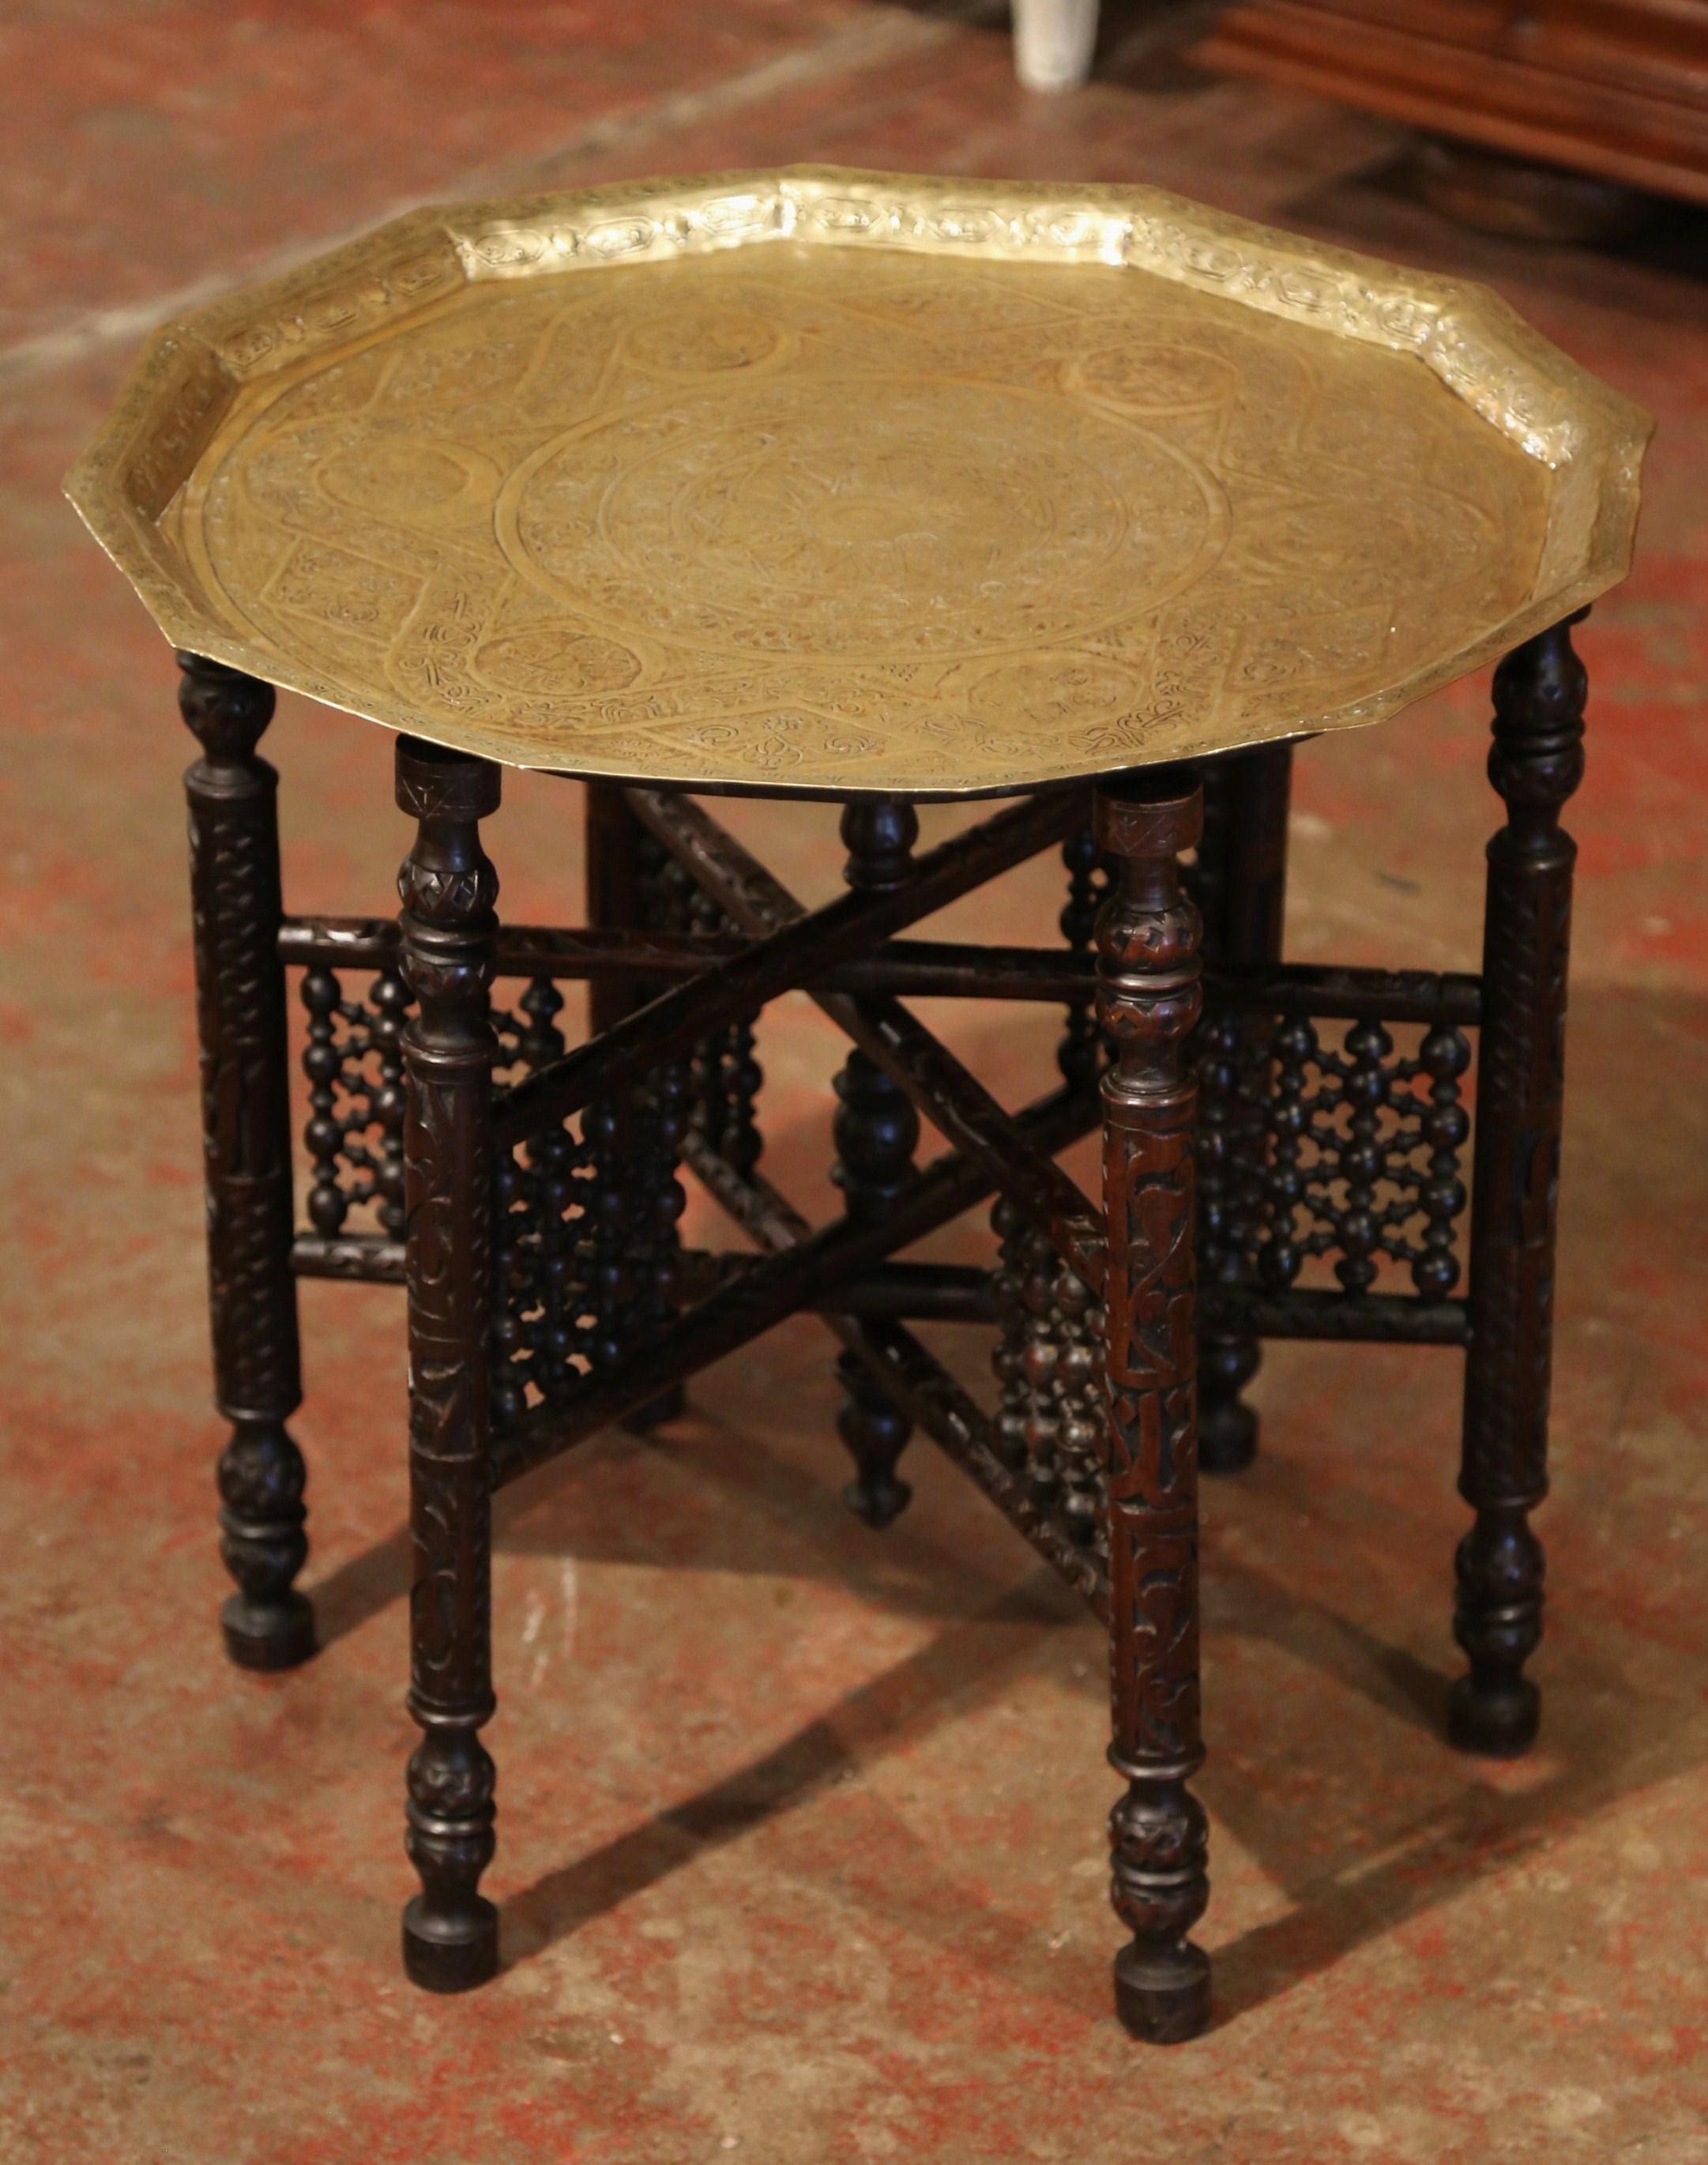 This small, versatile coffee table was crafted in Morocco, circa 1890. The folding base with decorative supports has six carved legs which can easily be folded up flat. The top features a twelve sided polygon brass tray top decorated with engraved